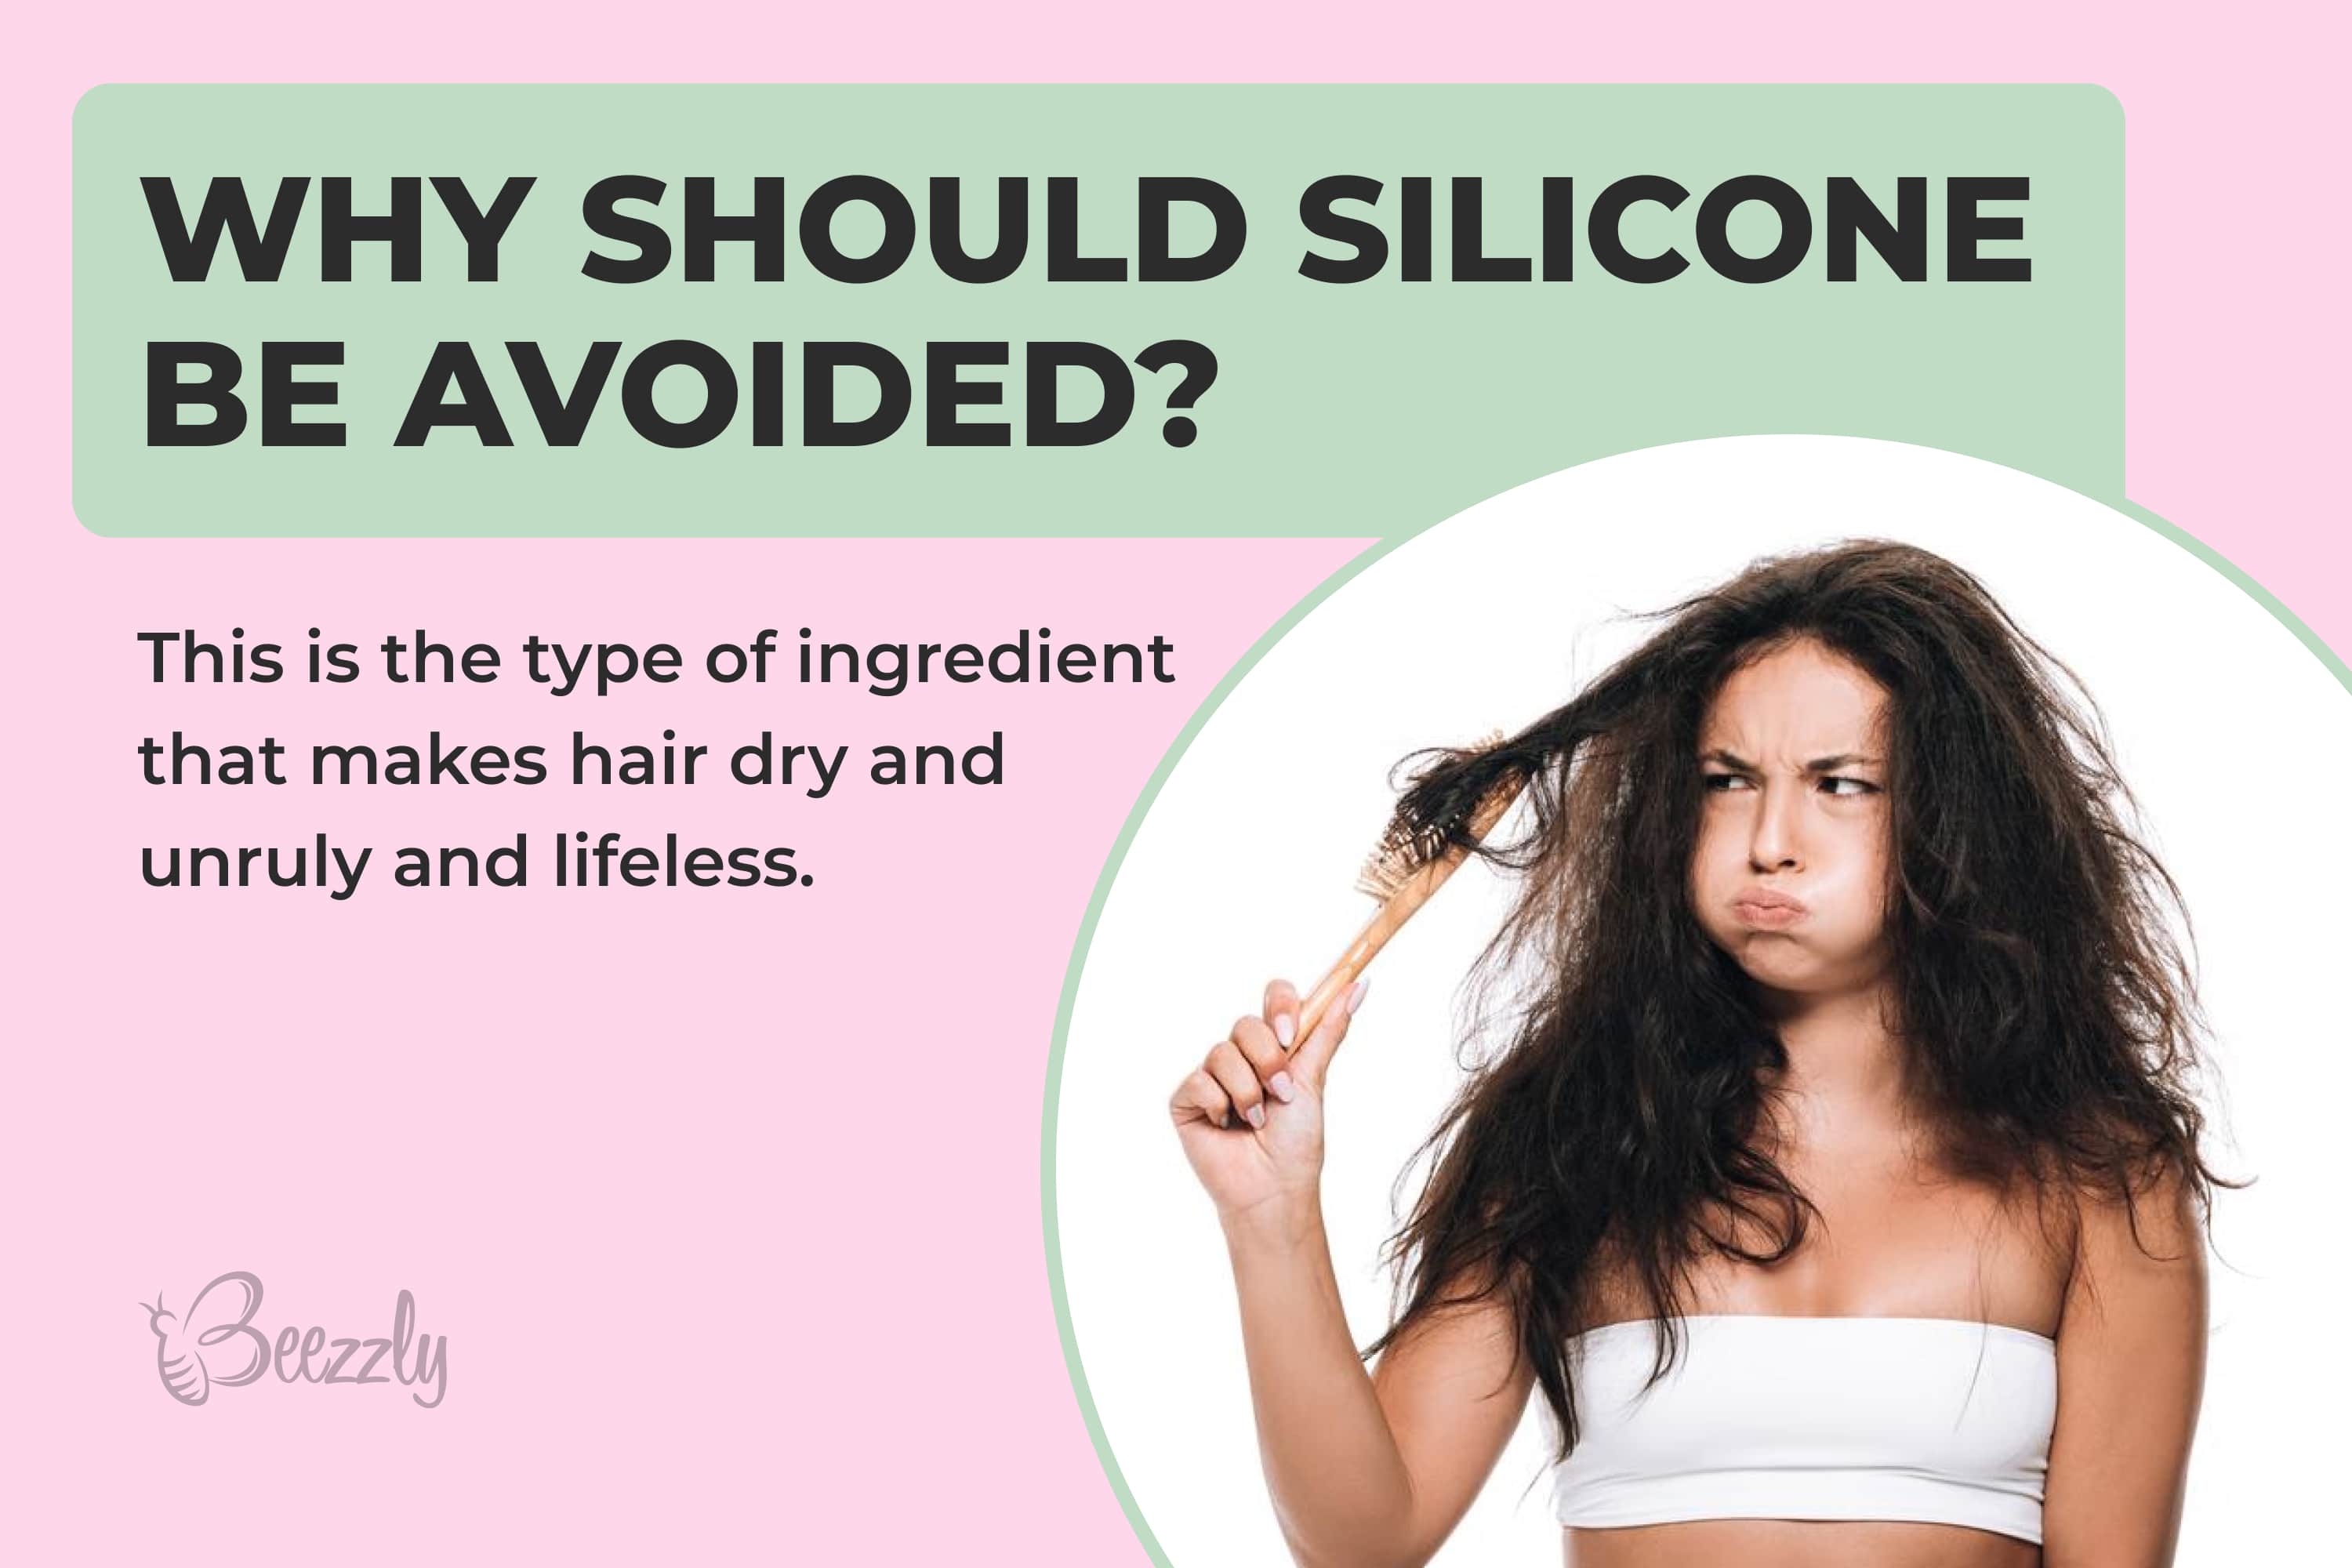 Why should silicone be avoided